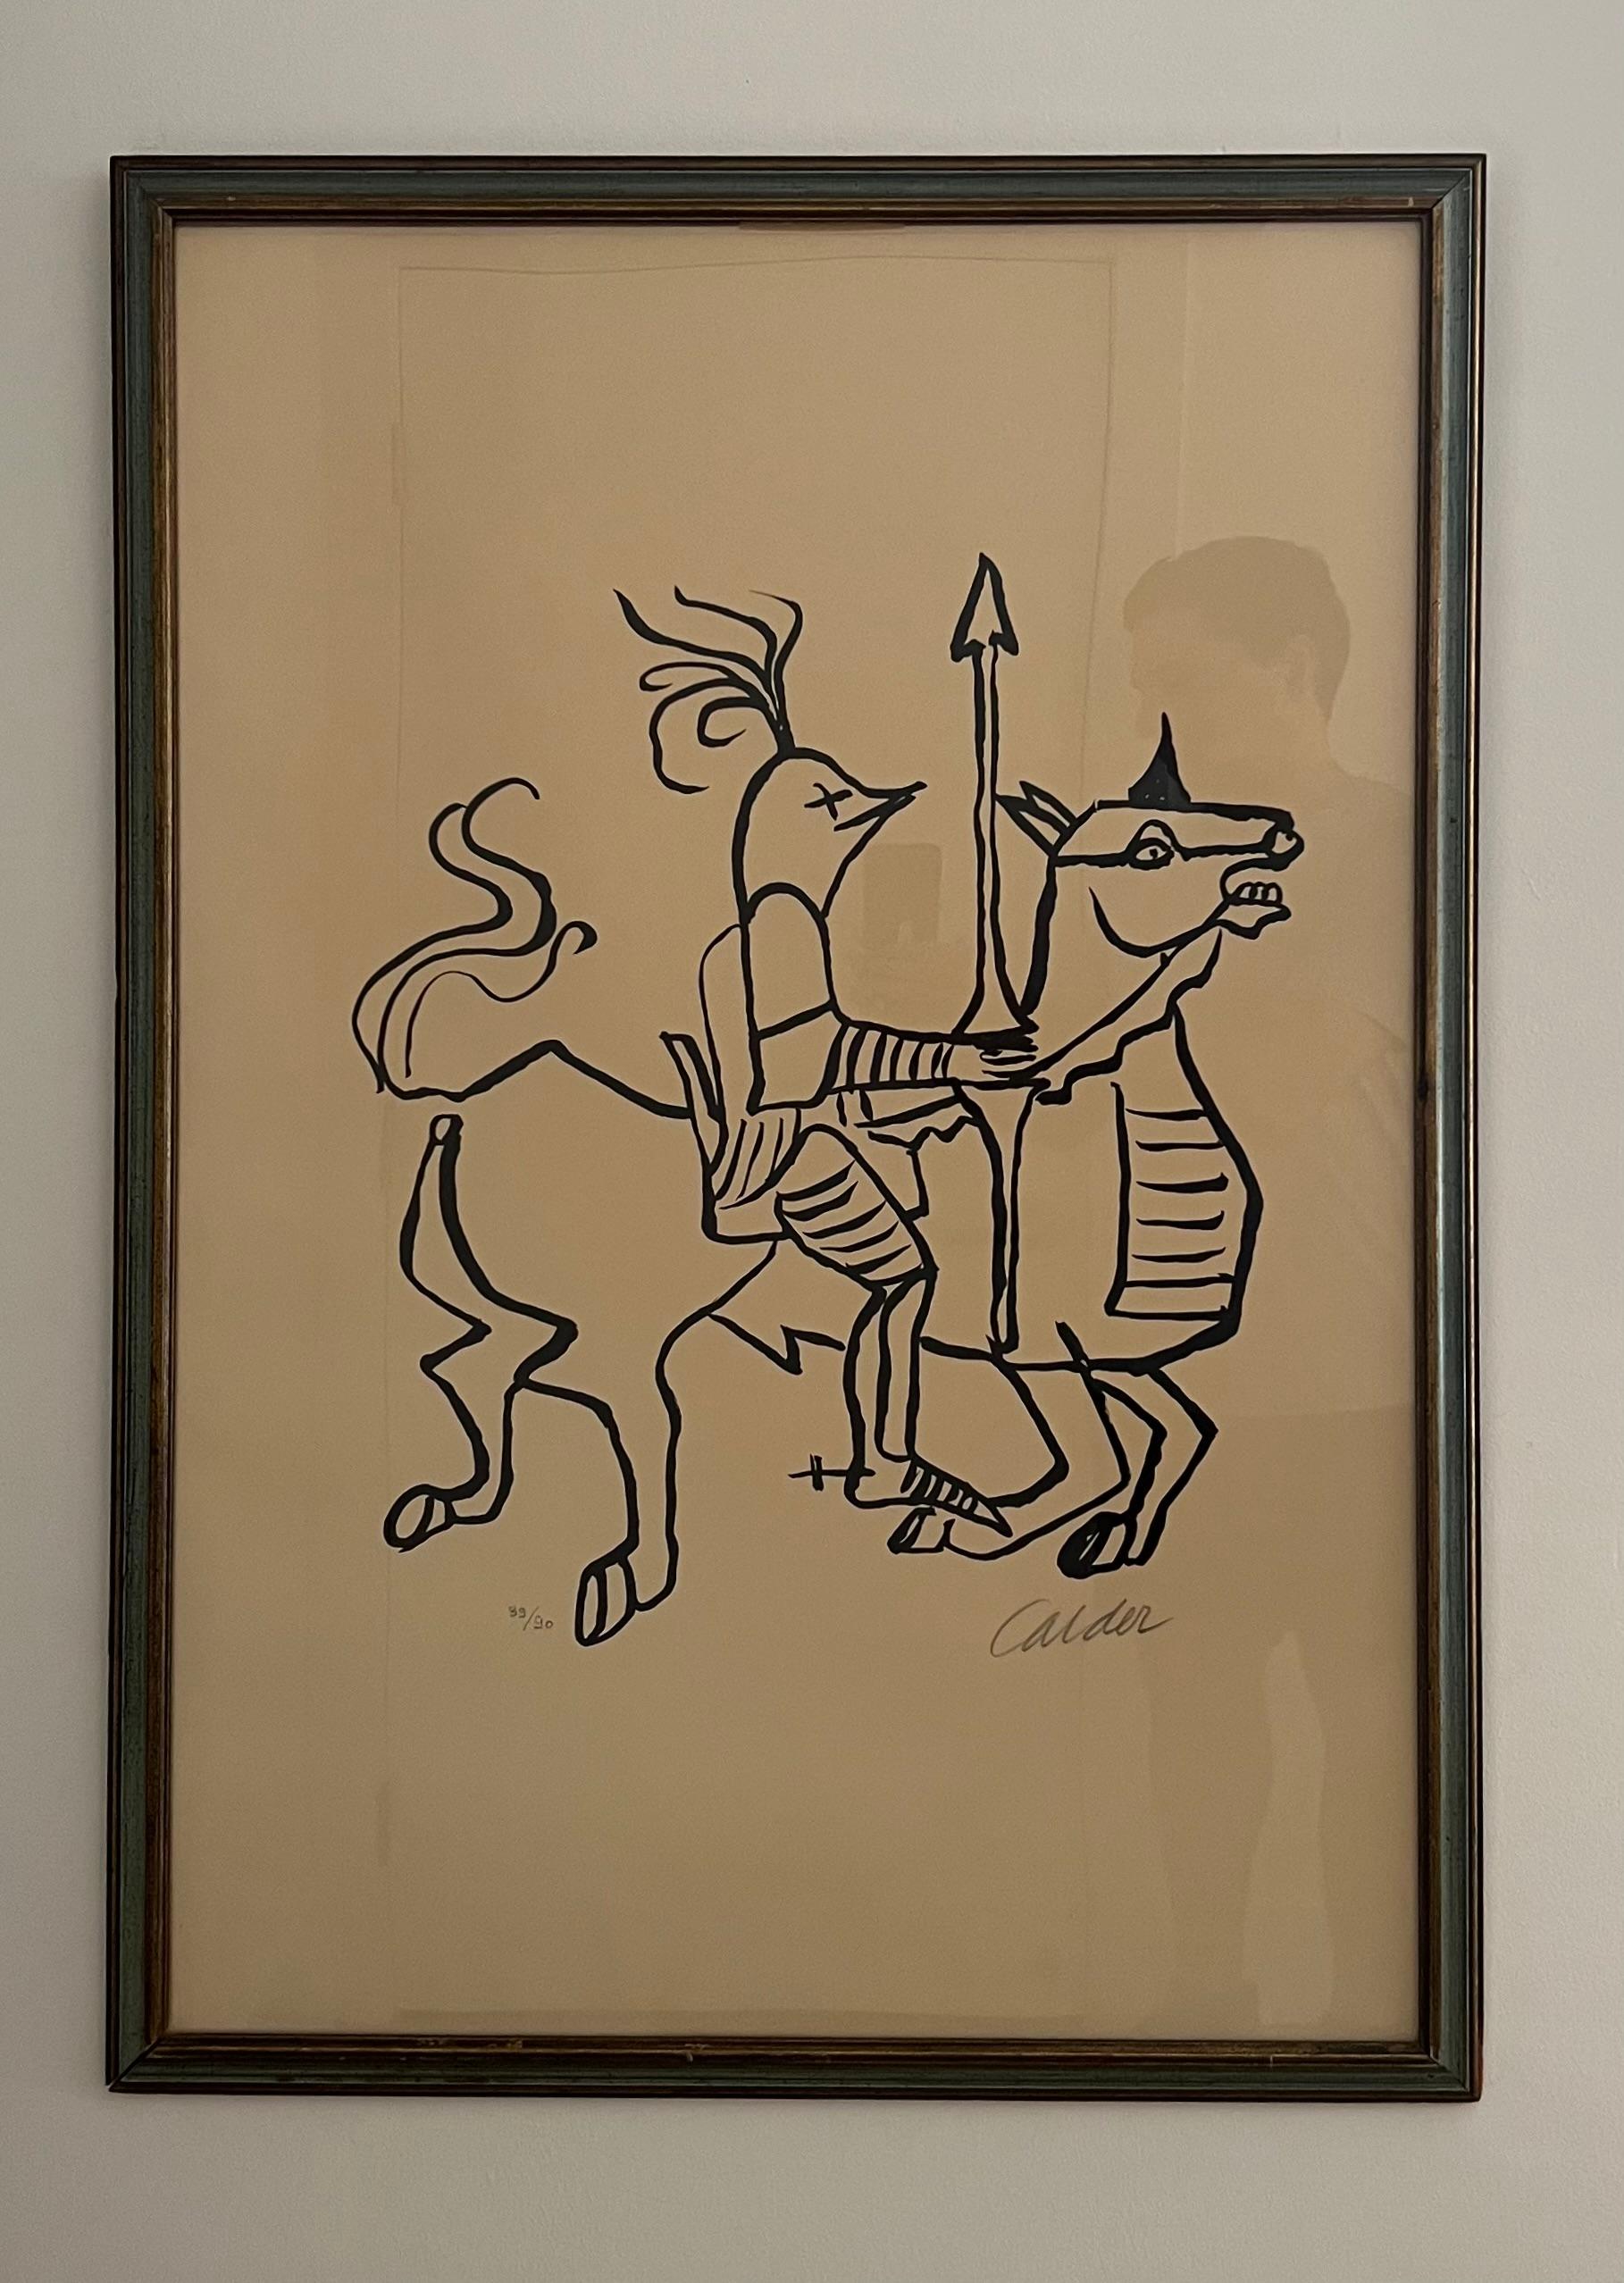 Le Chevalier (Knight), 1968

Lithograph on Chiffon de Mandeure paper

Maeght Editeur, Paris

31.25 x 23.62 inches 

Signed and numbered in pencil, edition of 90 copies 

Framed (not examined out of the frame)

Alexander Calder was born in